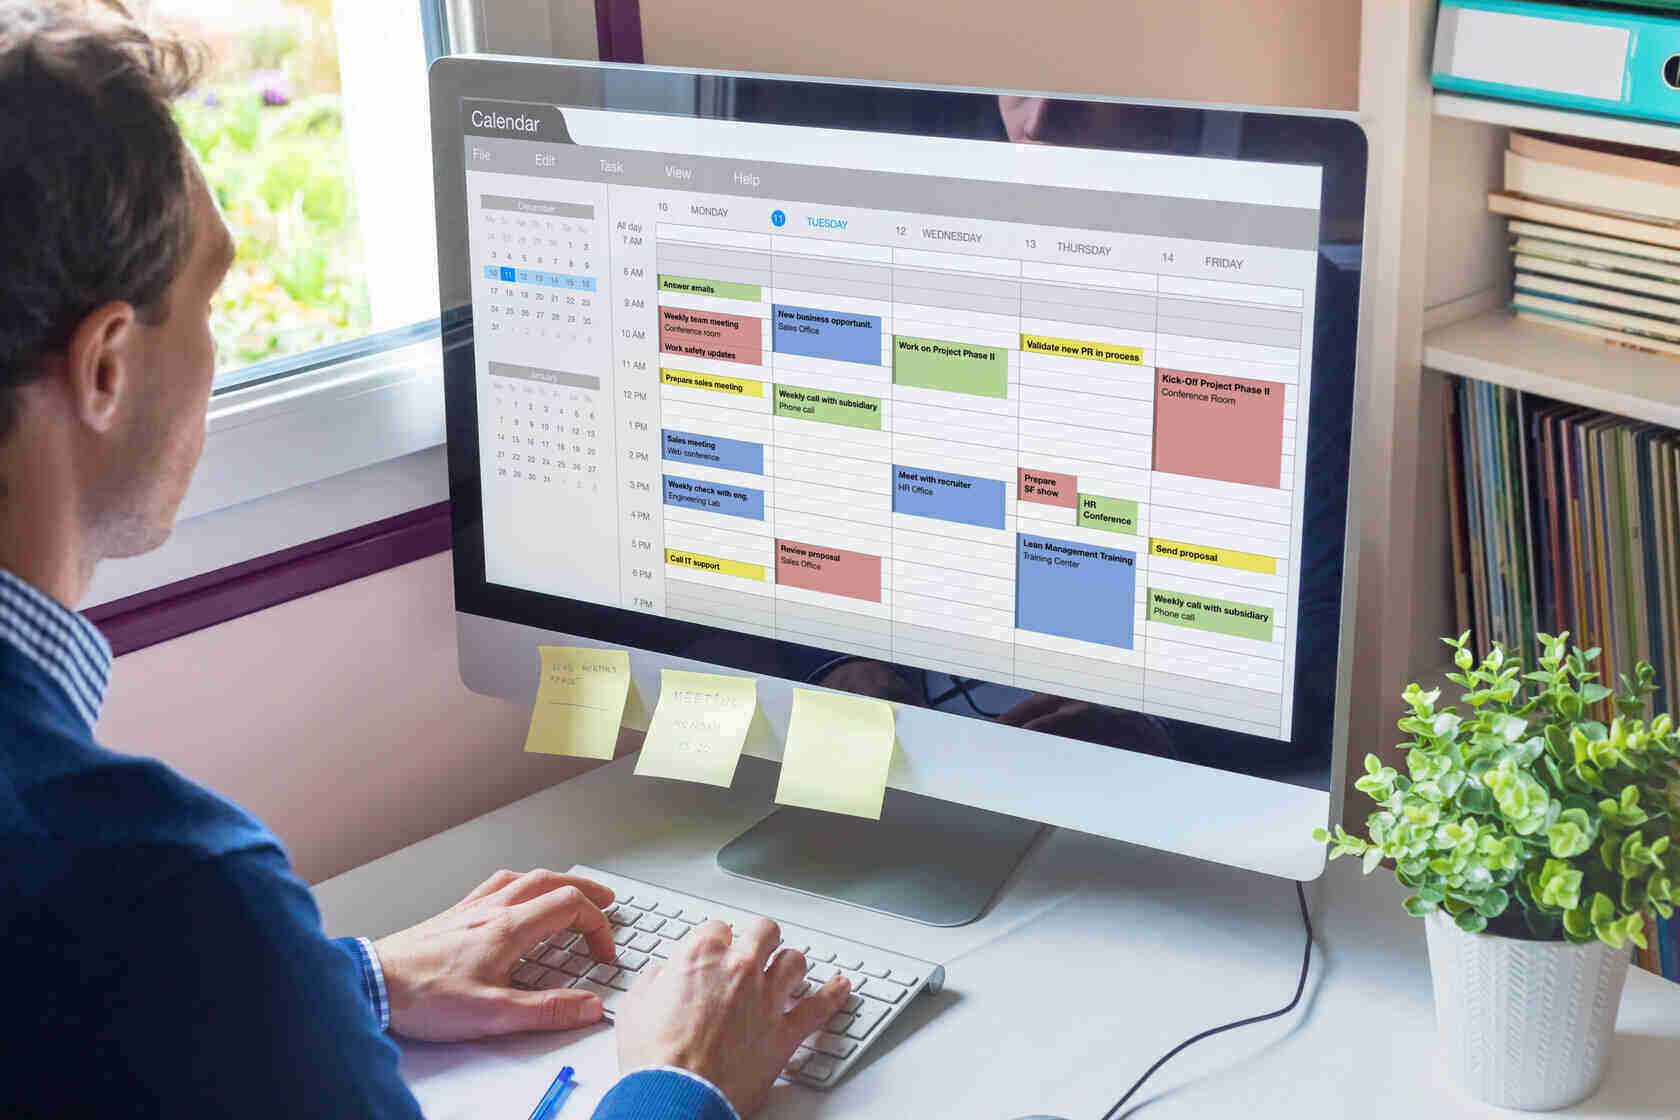 A man uses an imac for calendar management, post it notes, organisation